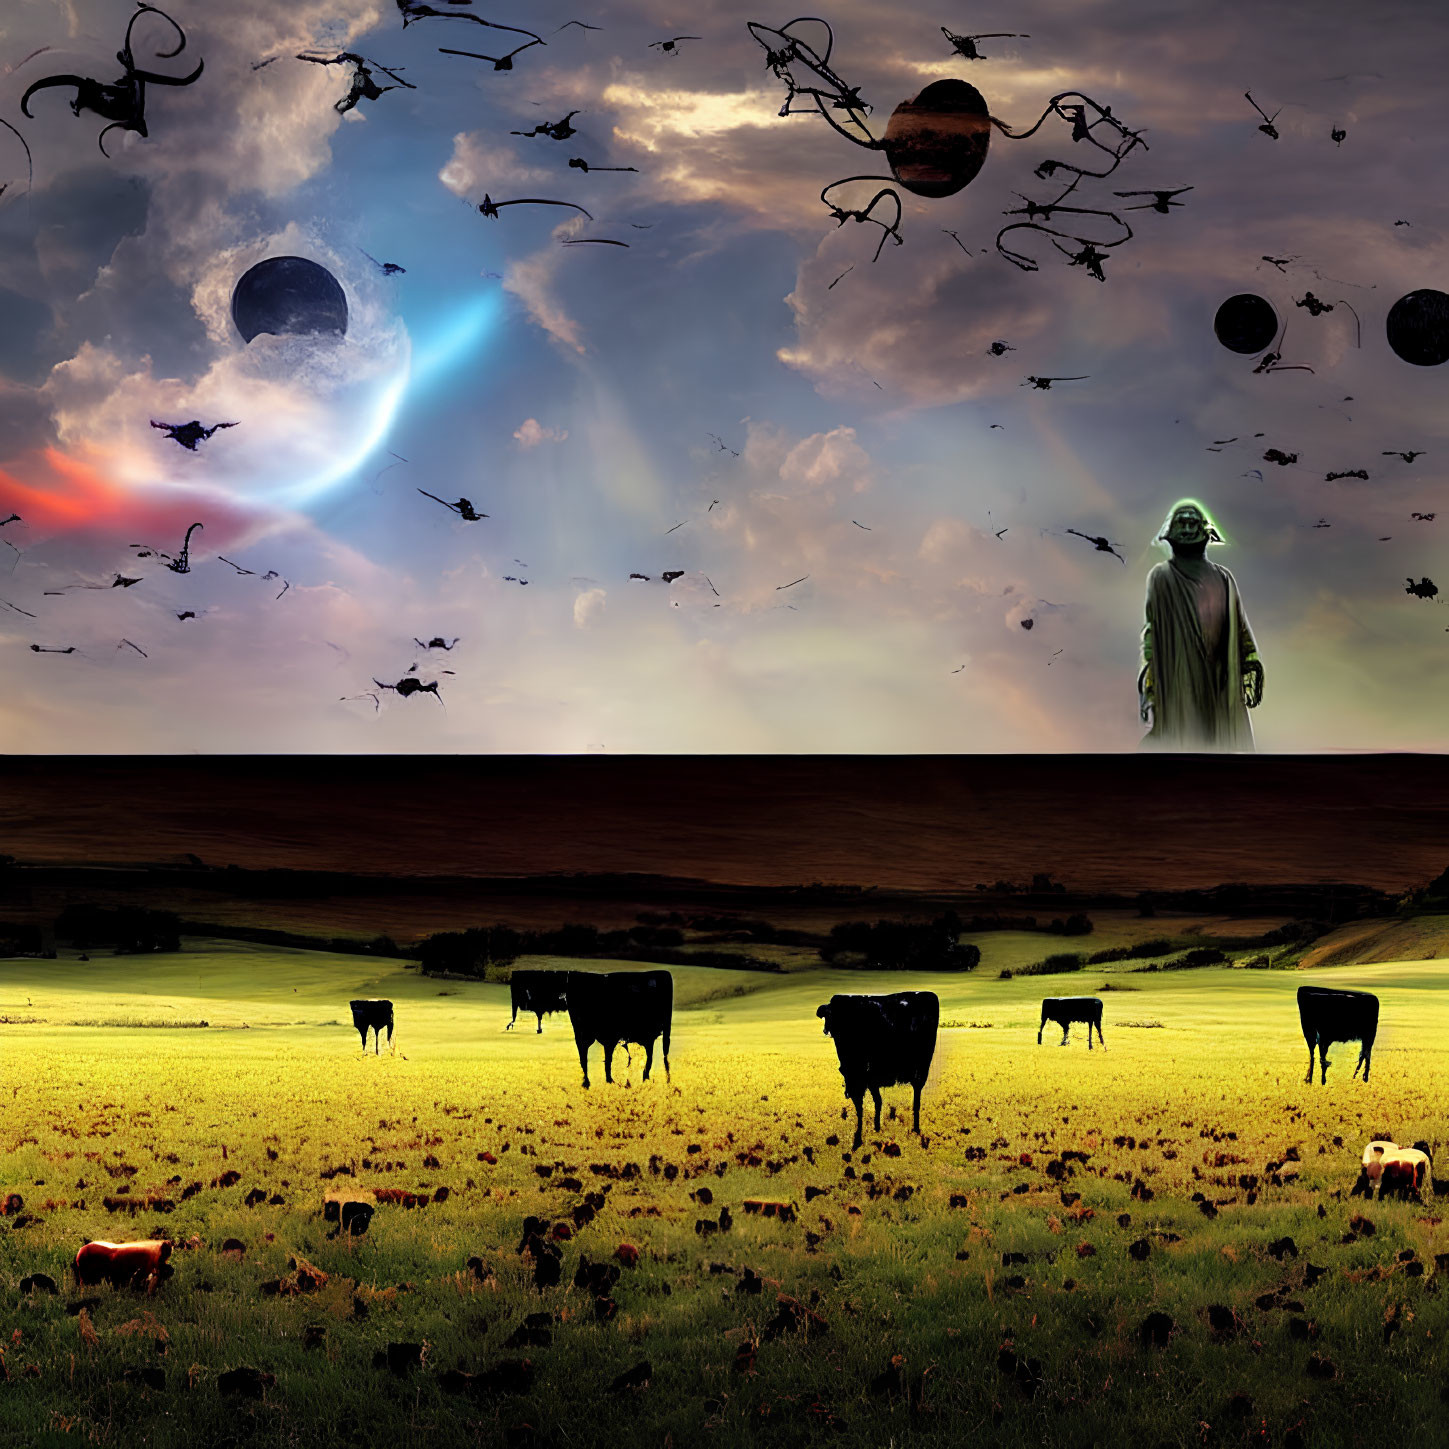 Surreal landscape with grazing cows, giant cloaked figure, and celestial sky